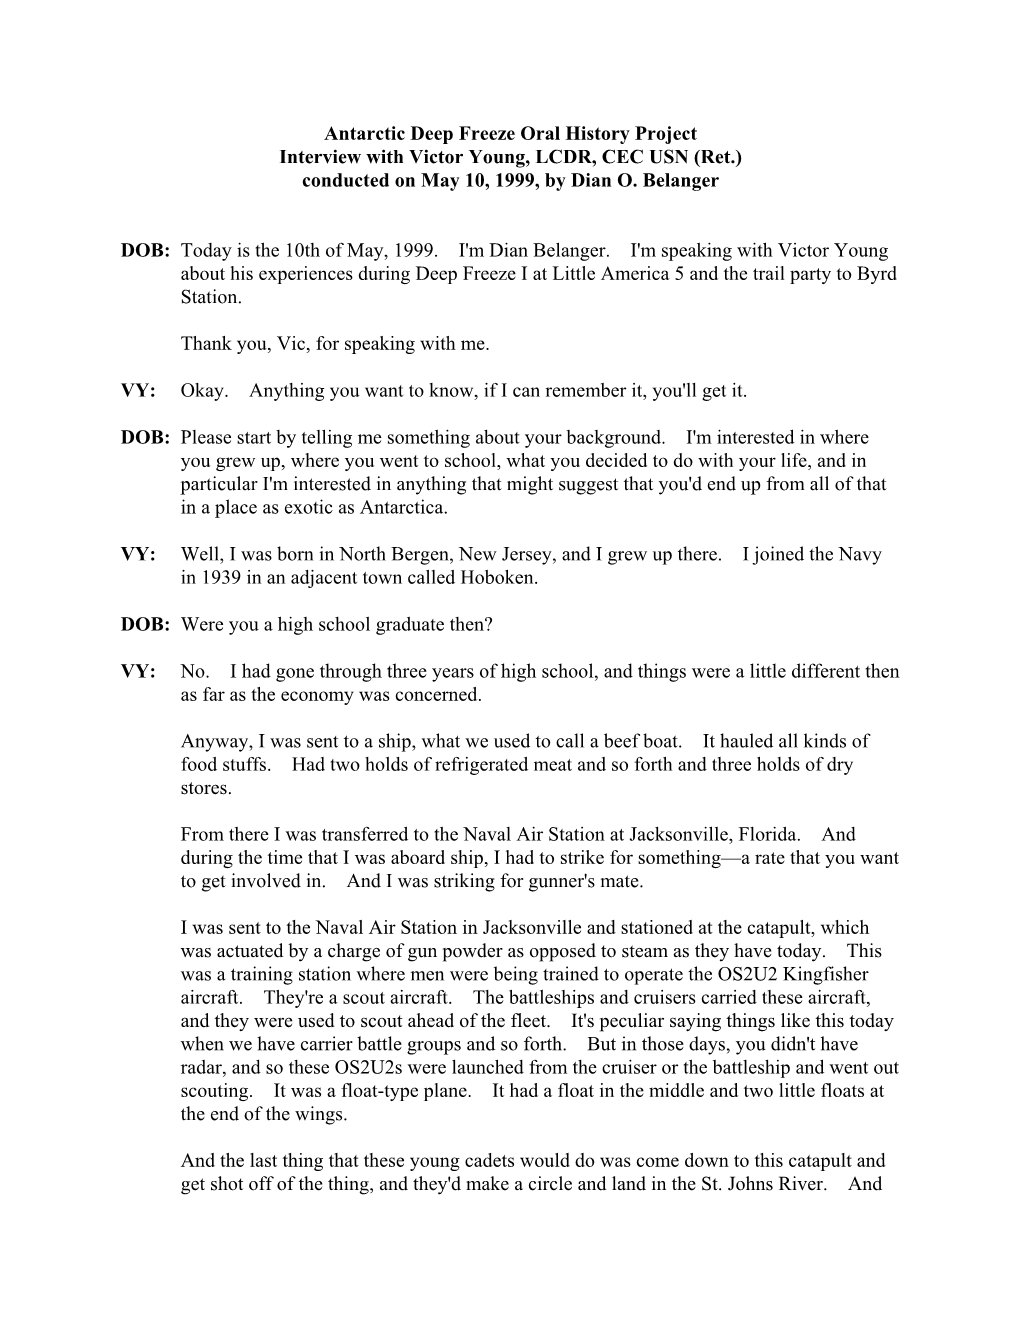 Antarctic Deep Freeze Oral History Project Interview with Victor Young, LCDR, CEC USN (Ret.) Conducted on May 10, 1999, by Dian O